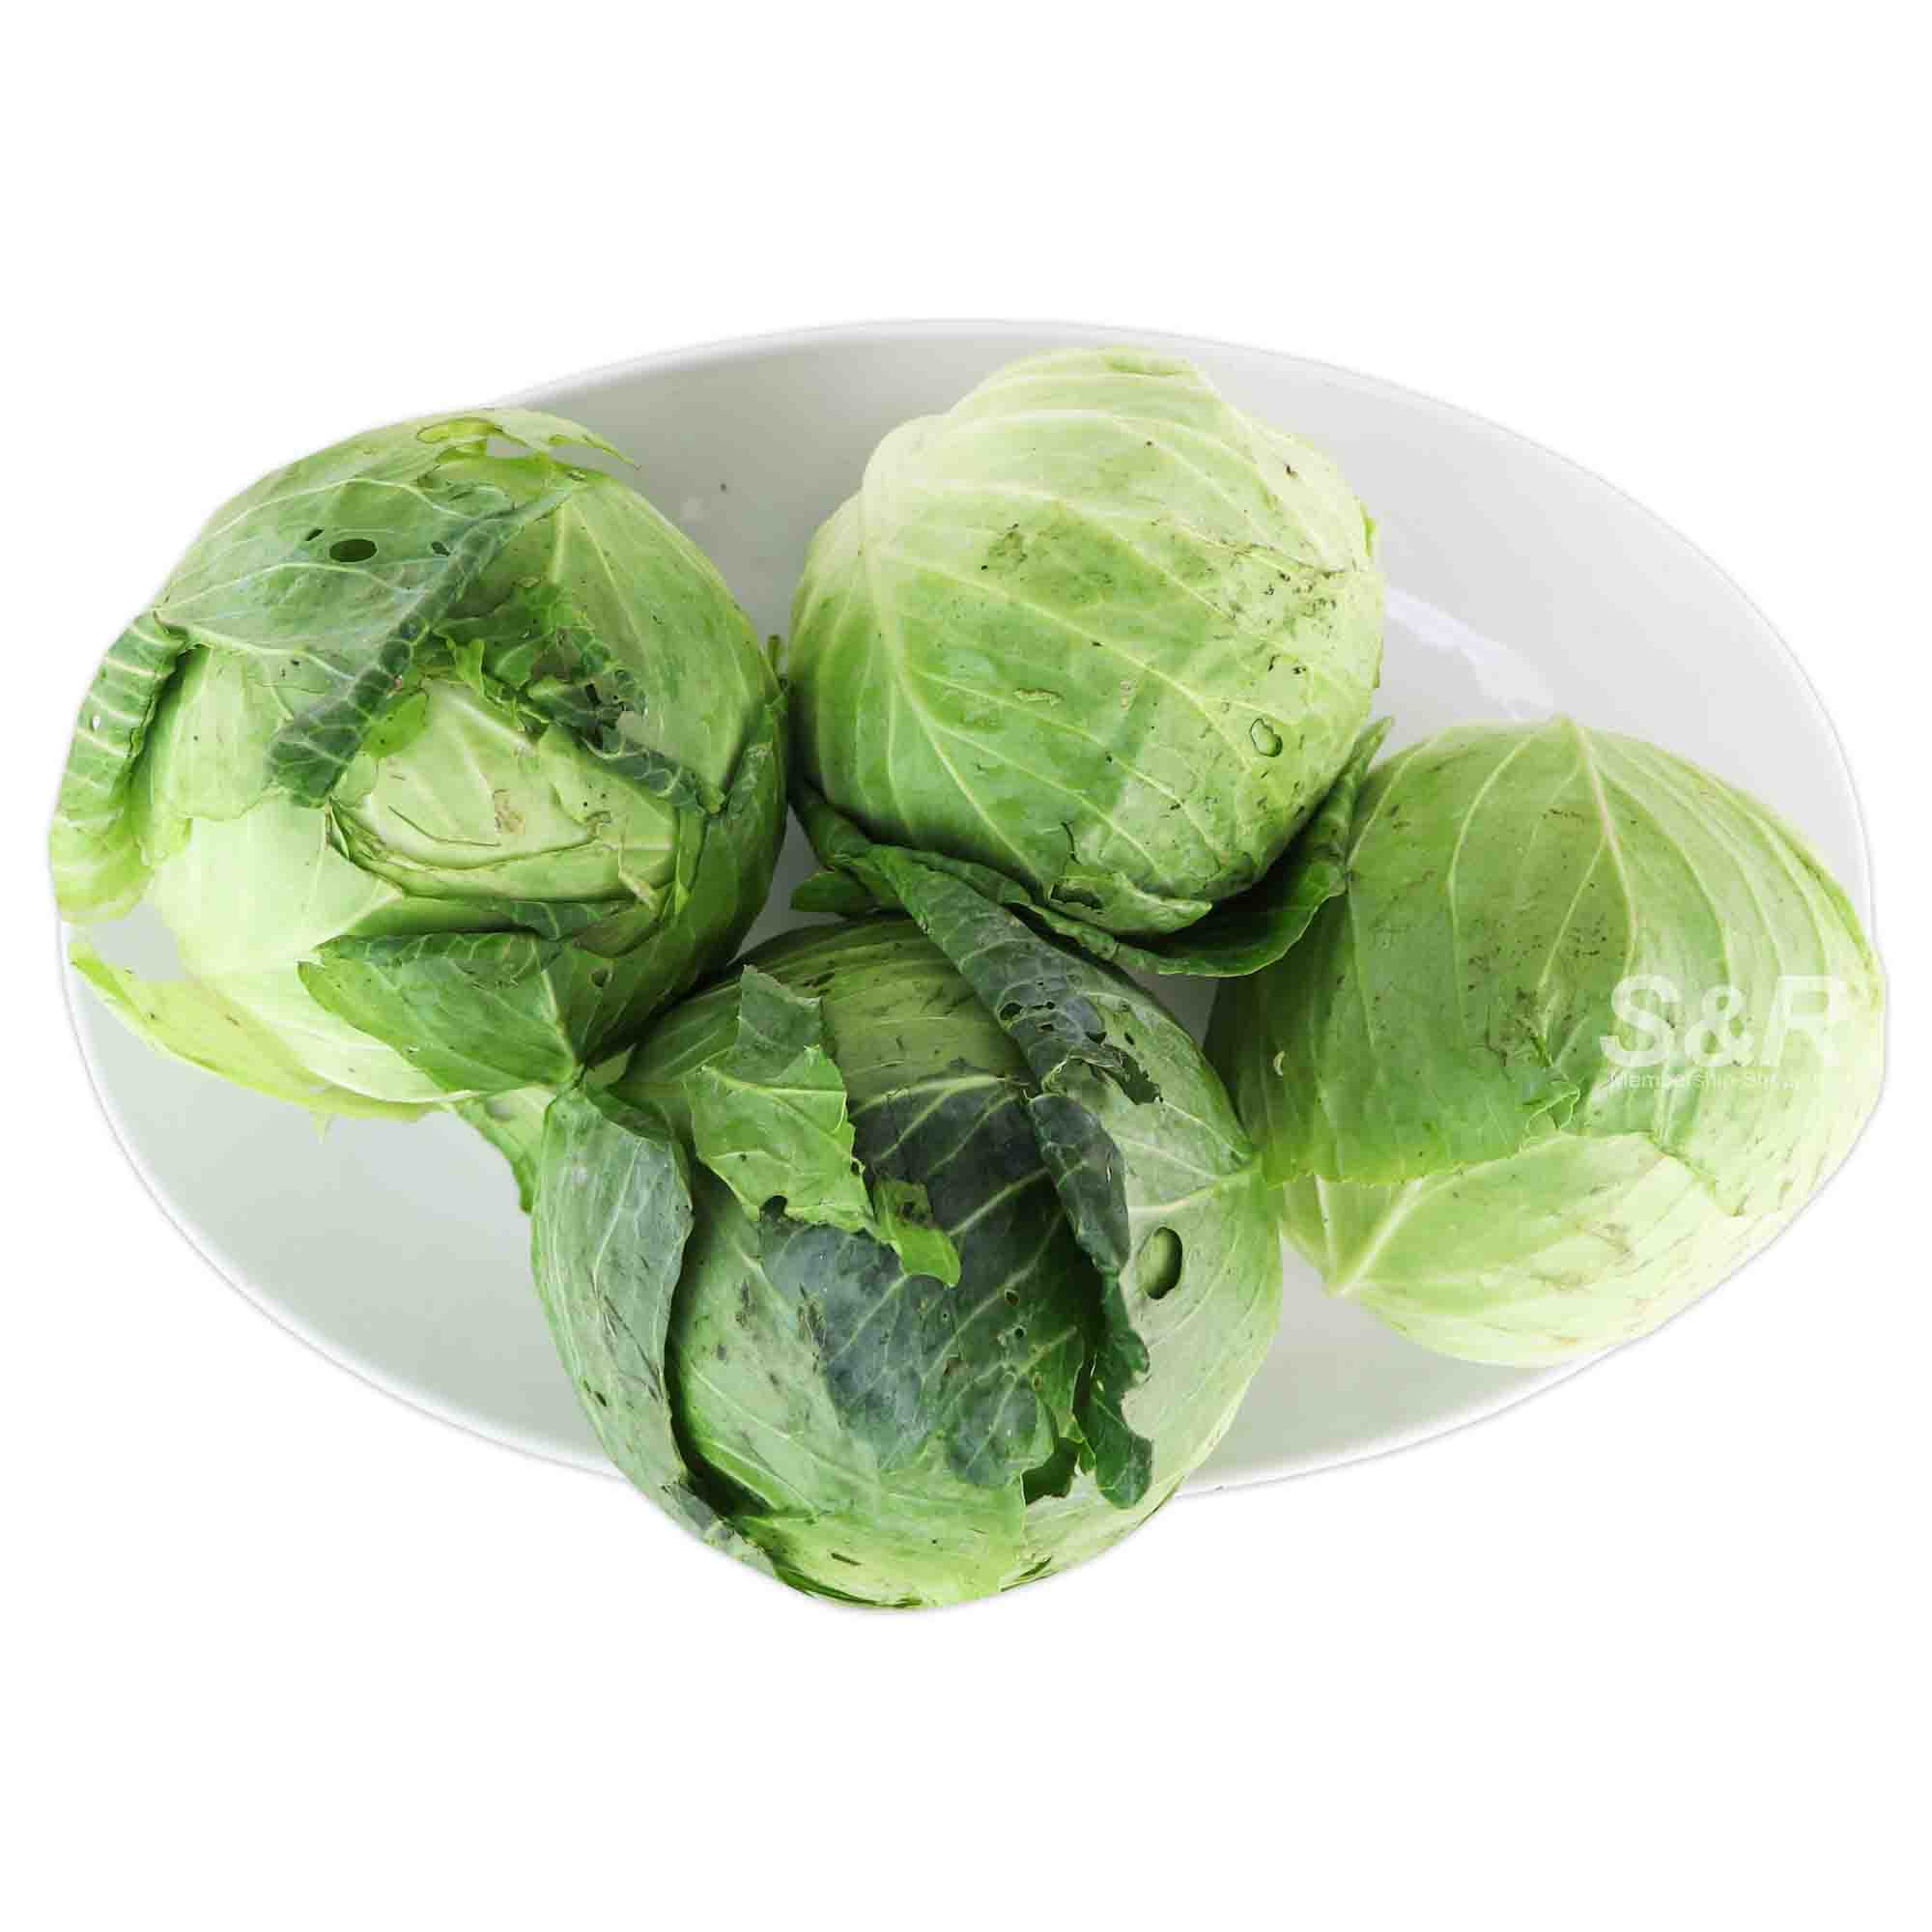 S&R Cabbage approx. 3.4kg